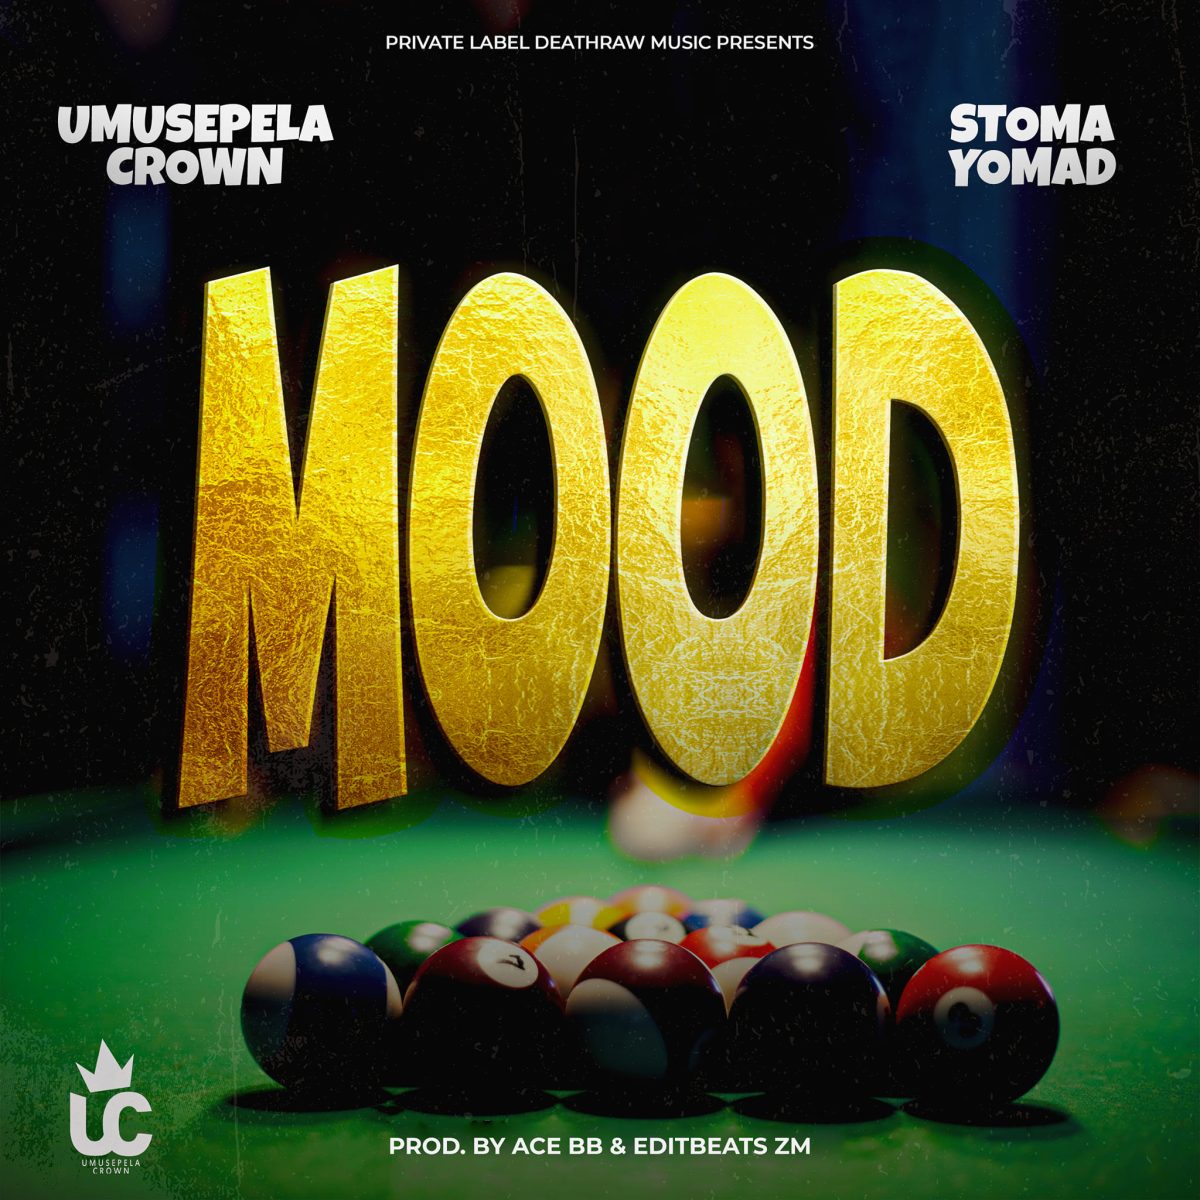 Umusepela Crown ft. Stoma Yomad - Mood (Official Video)